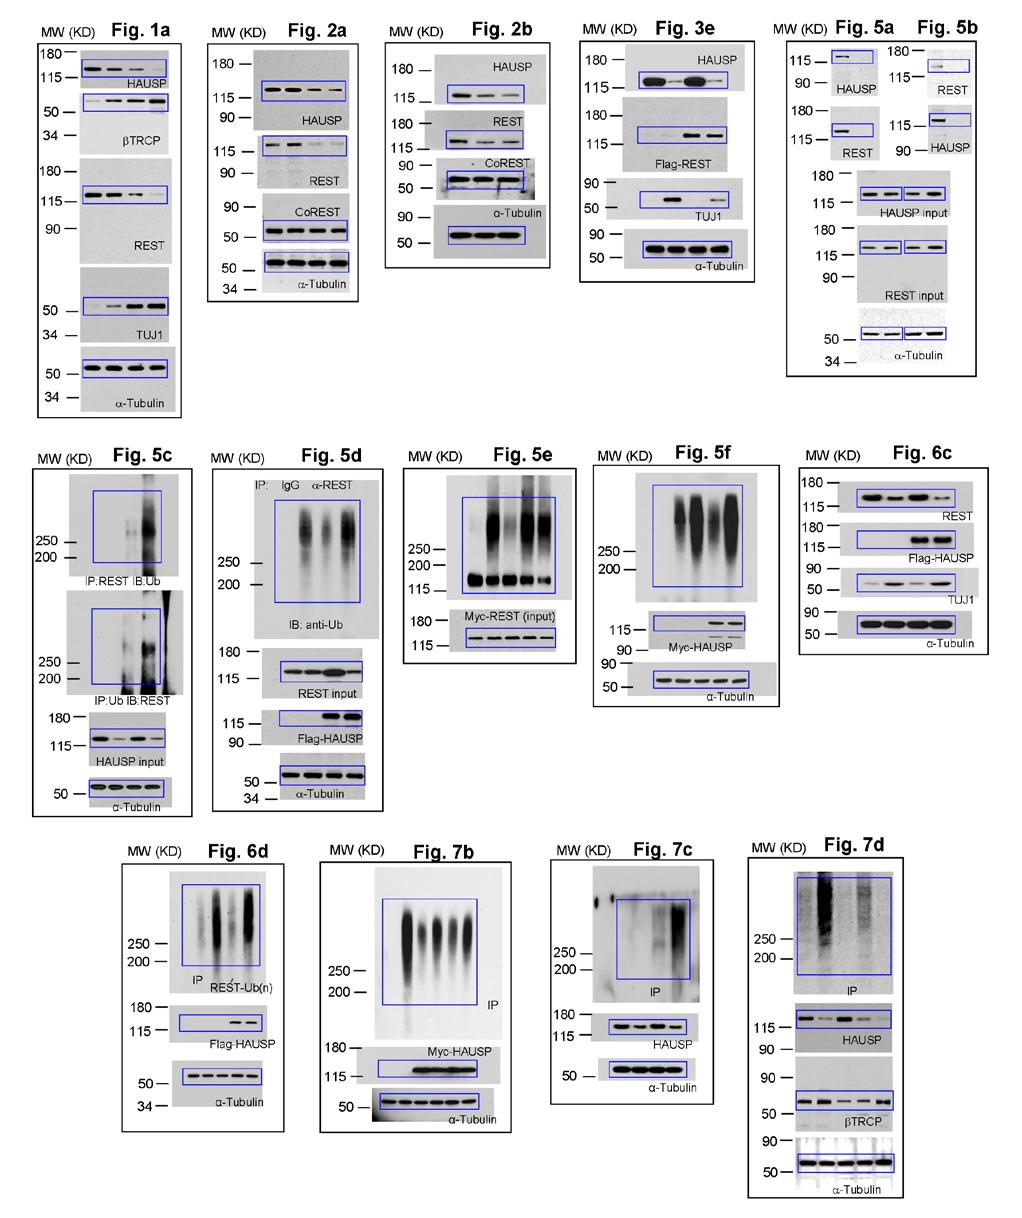 Figure S8 Uncropped images of immunoblots shown in the main figures